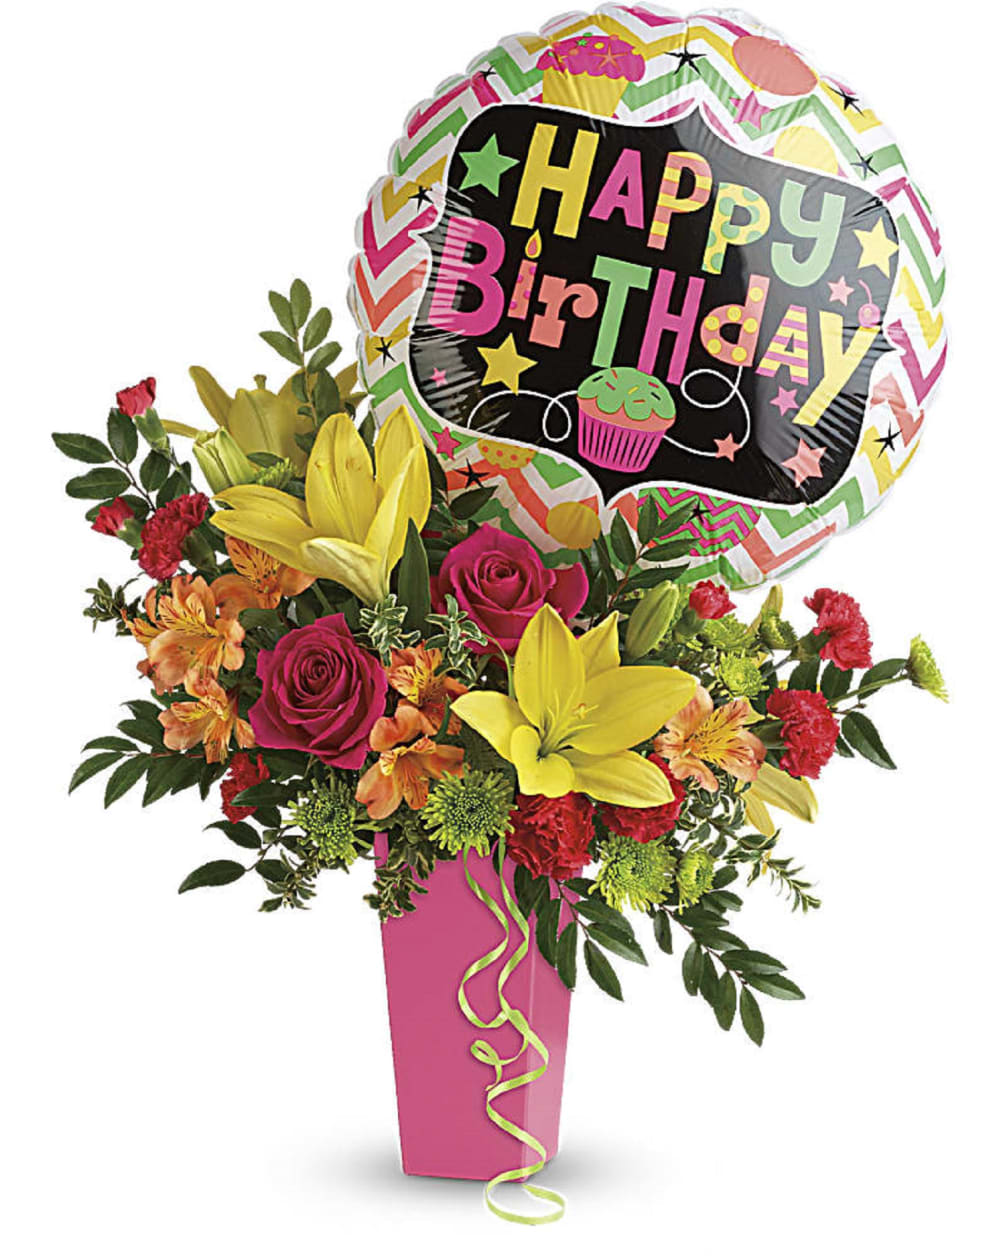 Celebrate their special day most beautifully with this burst of bright blooms